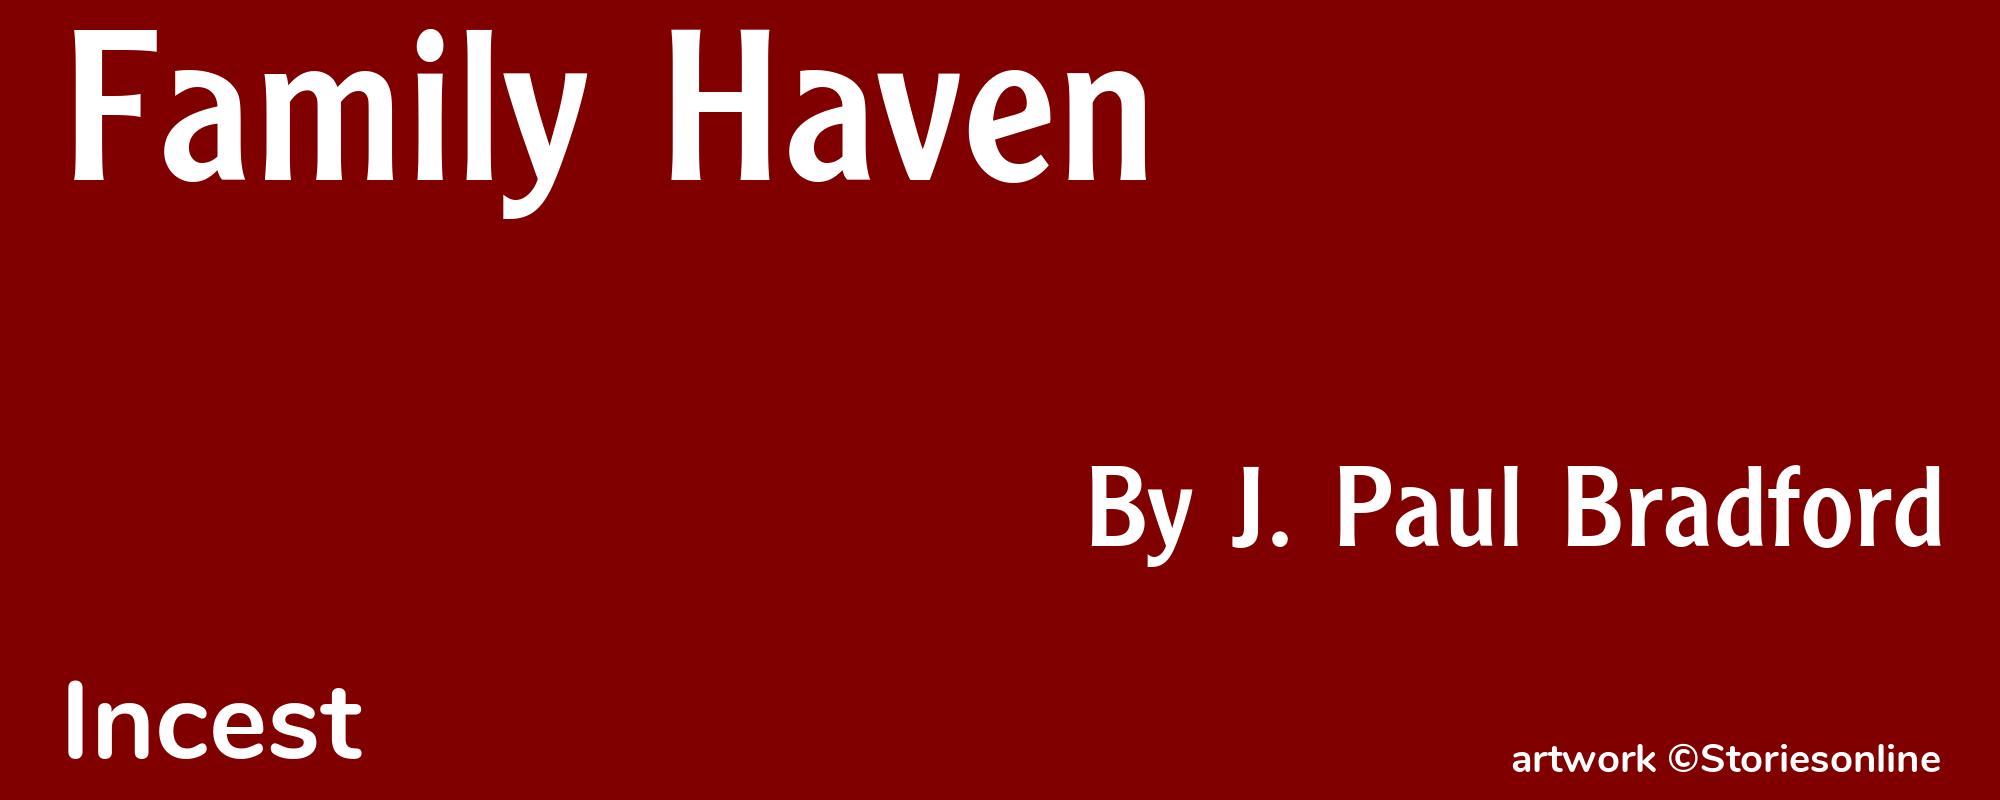 Family Haven - Cover